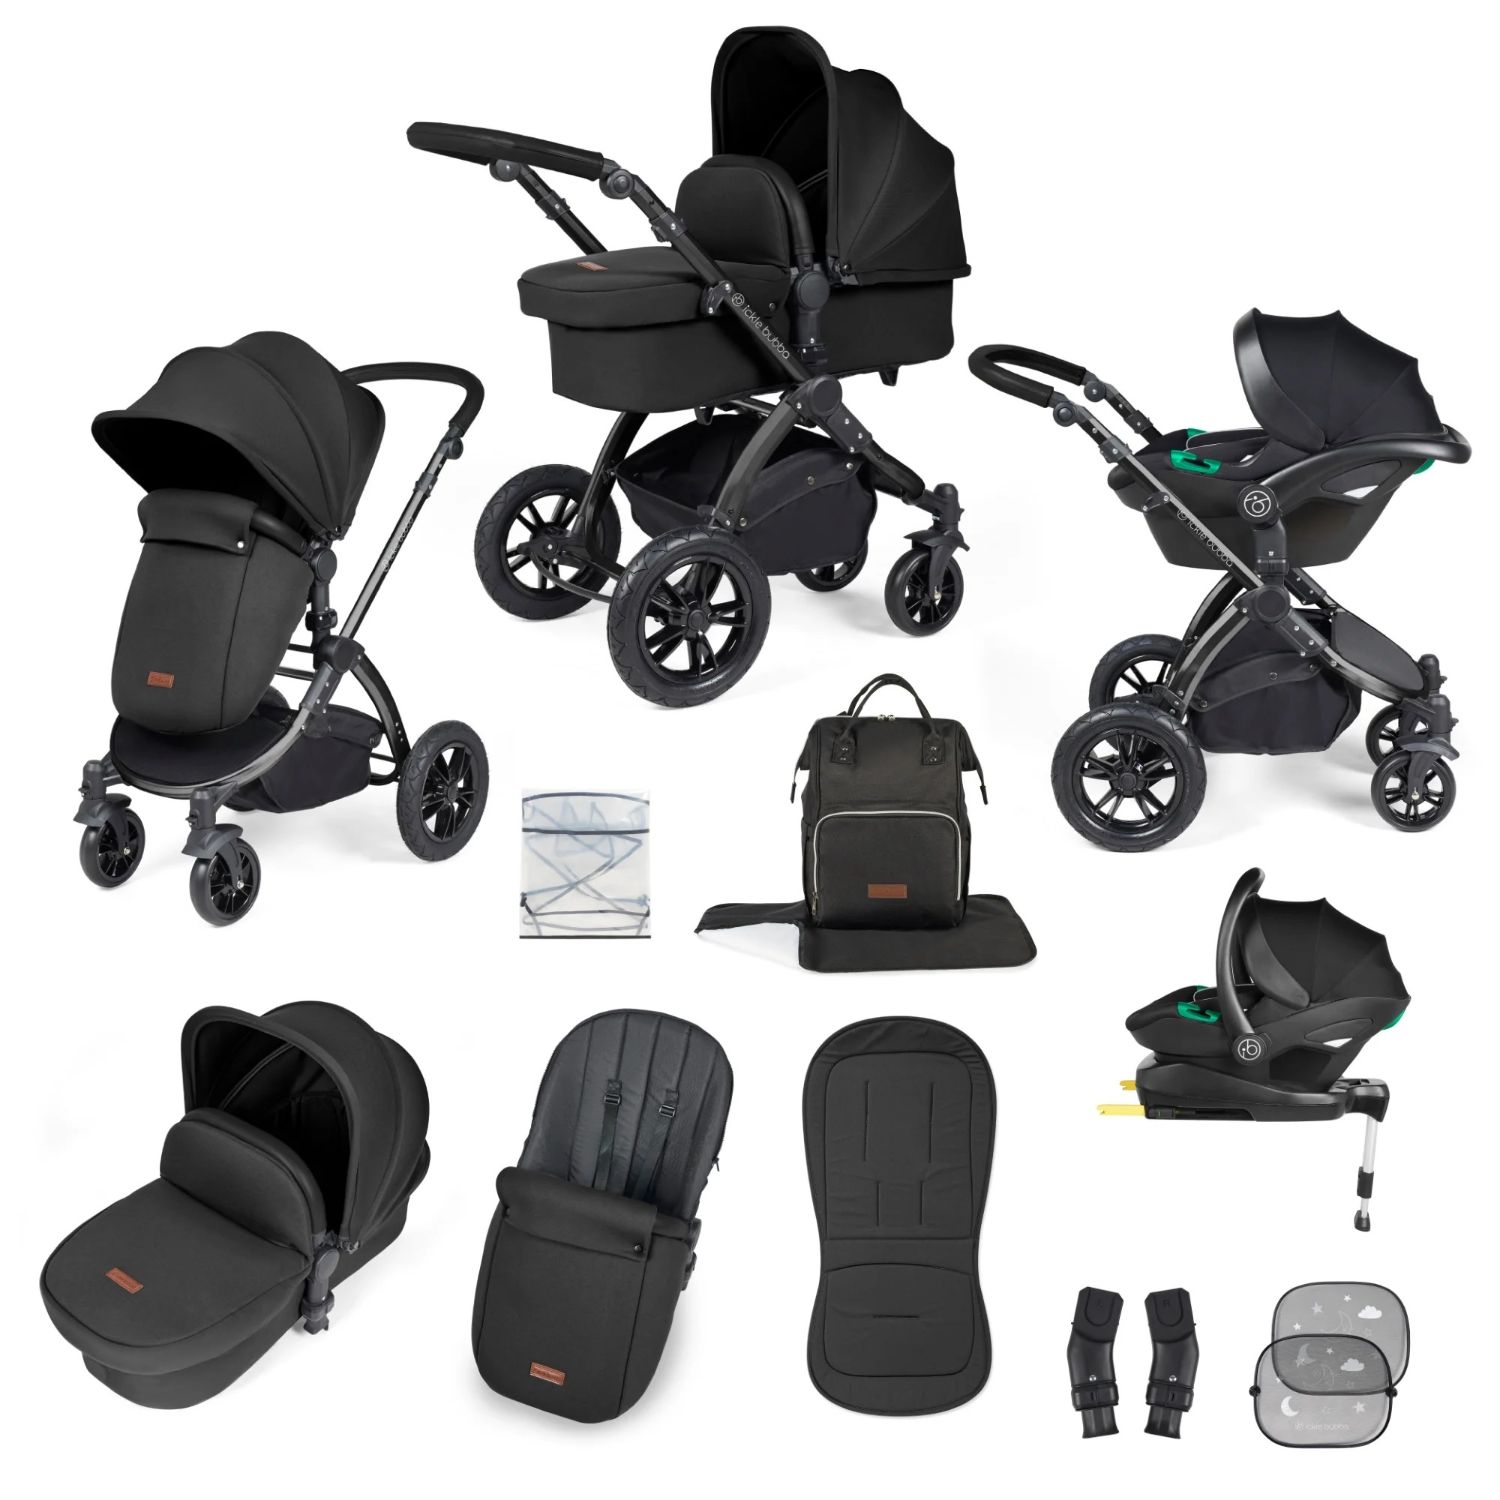 Ickle Bubba Stomp Luxe All-in-One Travel System with Stratus i-Size Car Seat and ISOFIX Base and accessories in Midnight black colour